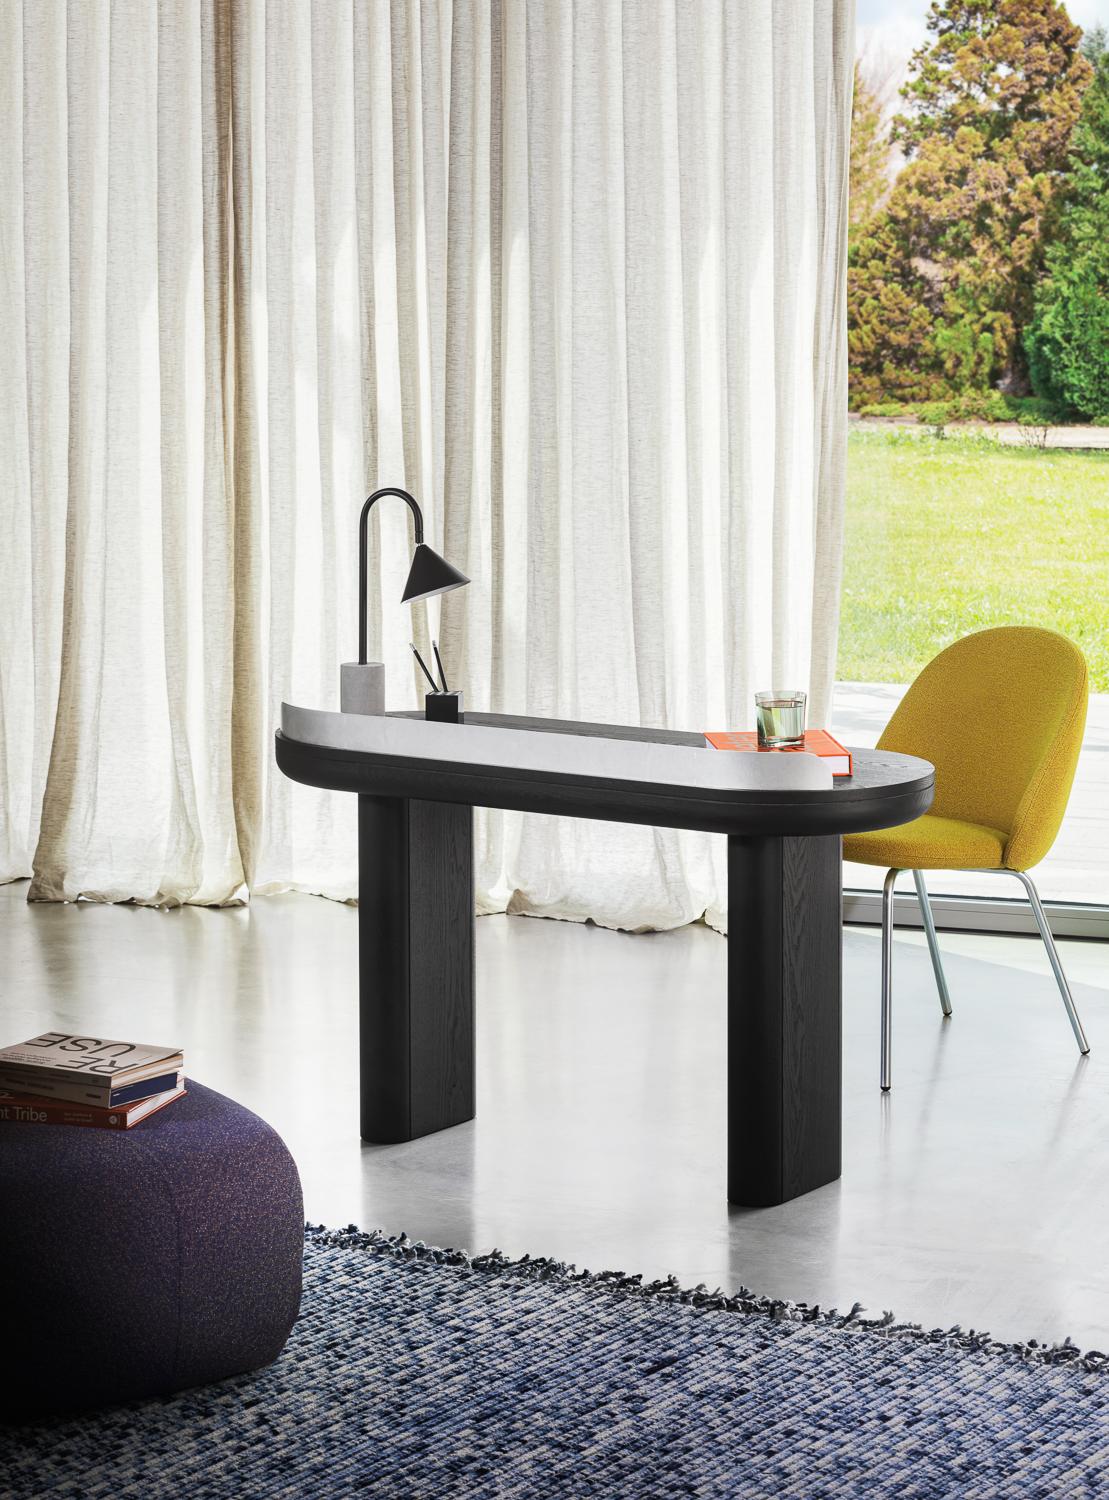 Ozz got shy, didn‘t she? Here it is in a small desk version, with an adjustable lampshade to be flexible even taking up minimum space. The counterweight appears fundamental even in the small size, keeping an intense dialogue with the lampshade and